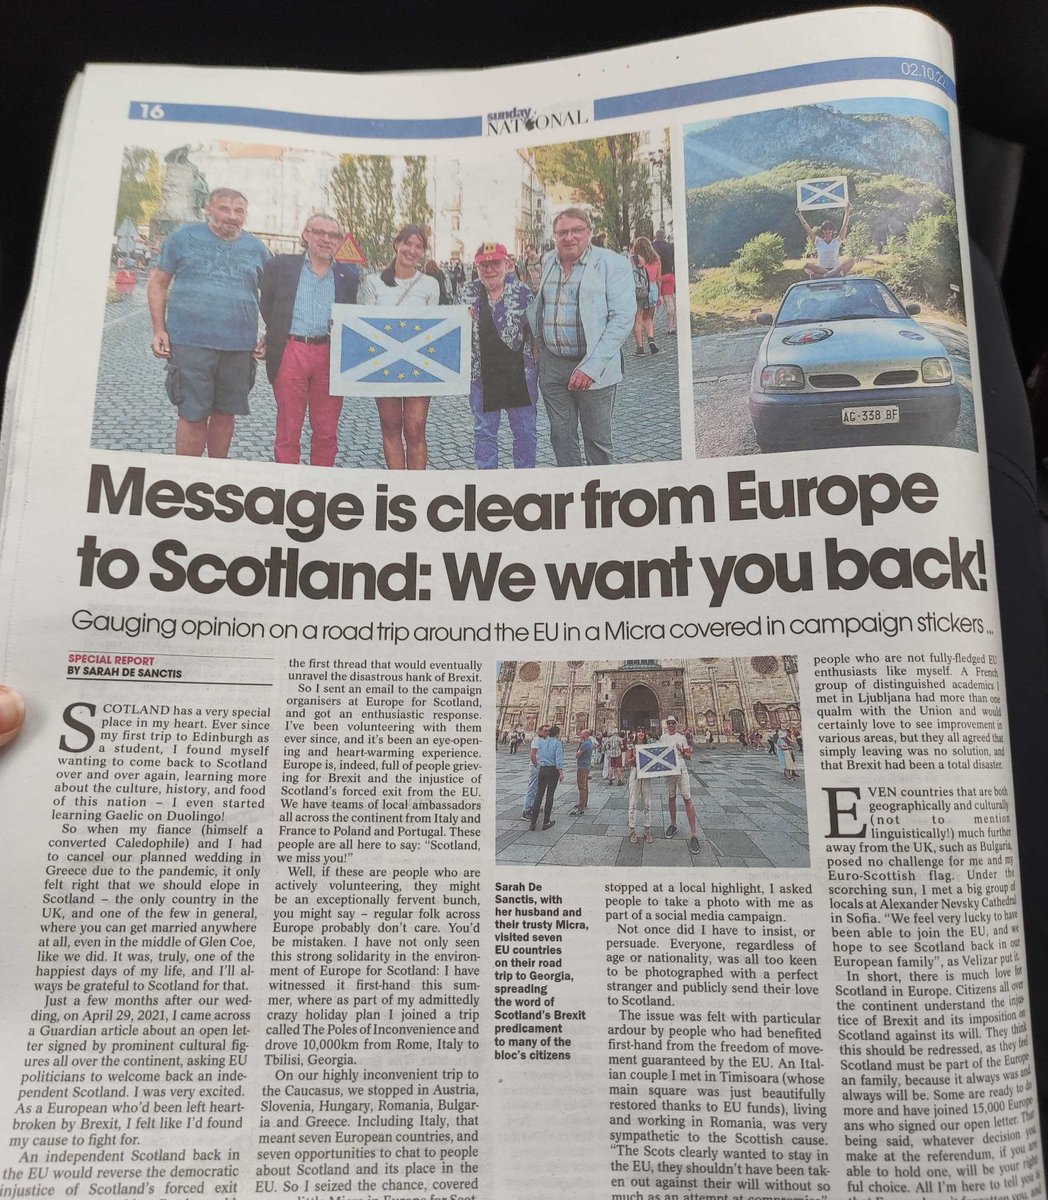 Don't miss @ScotNational today featuring a special report from our Italian ambassador @desanctissarah on her recent trip across Europe. The message from Europe is clear and unanimous: we want Scotland back! #europeforscotland 🇪🇺❤️🏴󠁧󠁢󠁳󠁣󠁴󠁿 thenational.scot/news/23007541.…